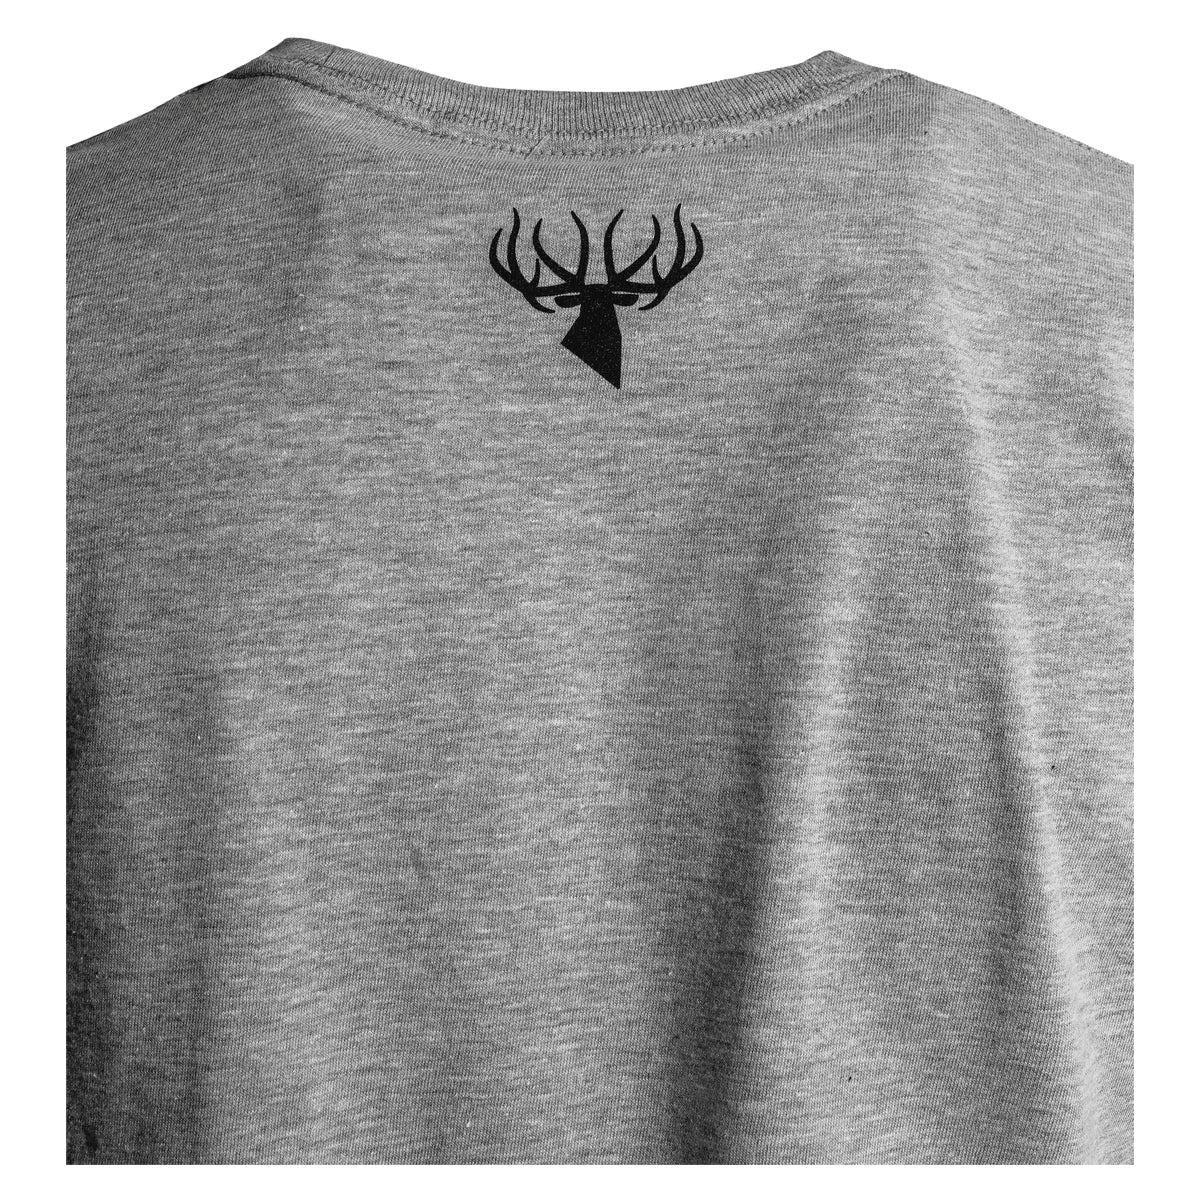 King's Any Tag Any Time Tee in  by GOHUNT | King's - GOHUNT Shop